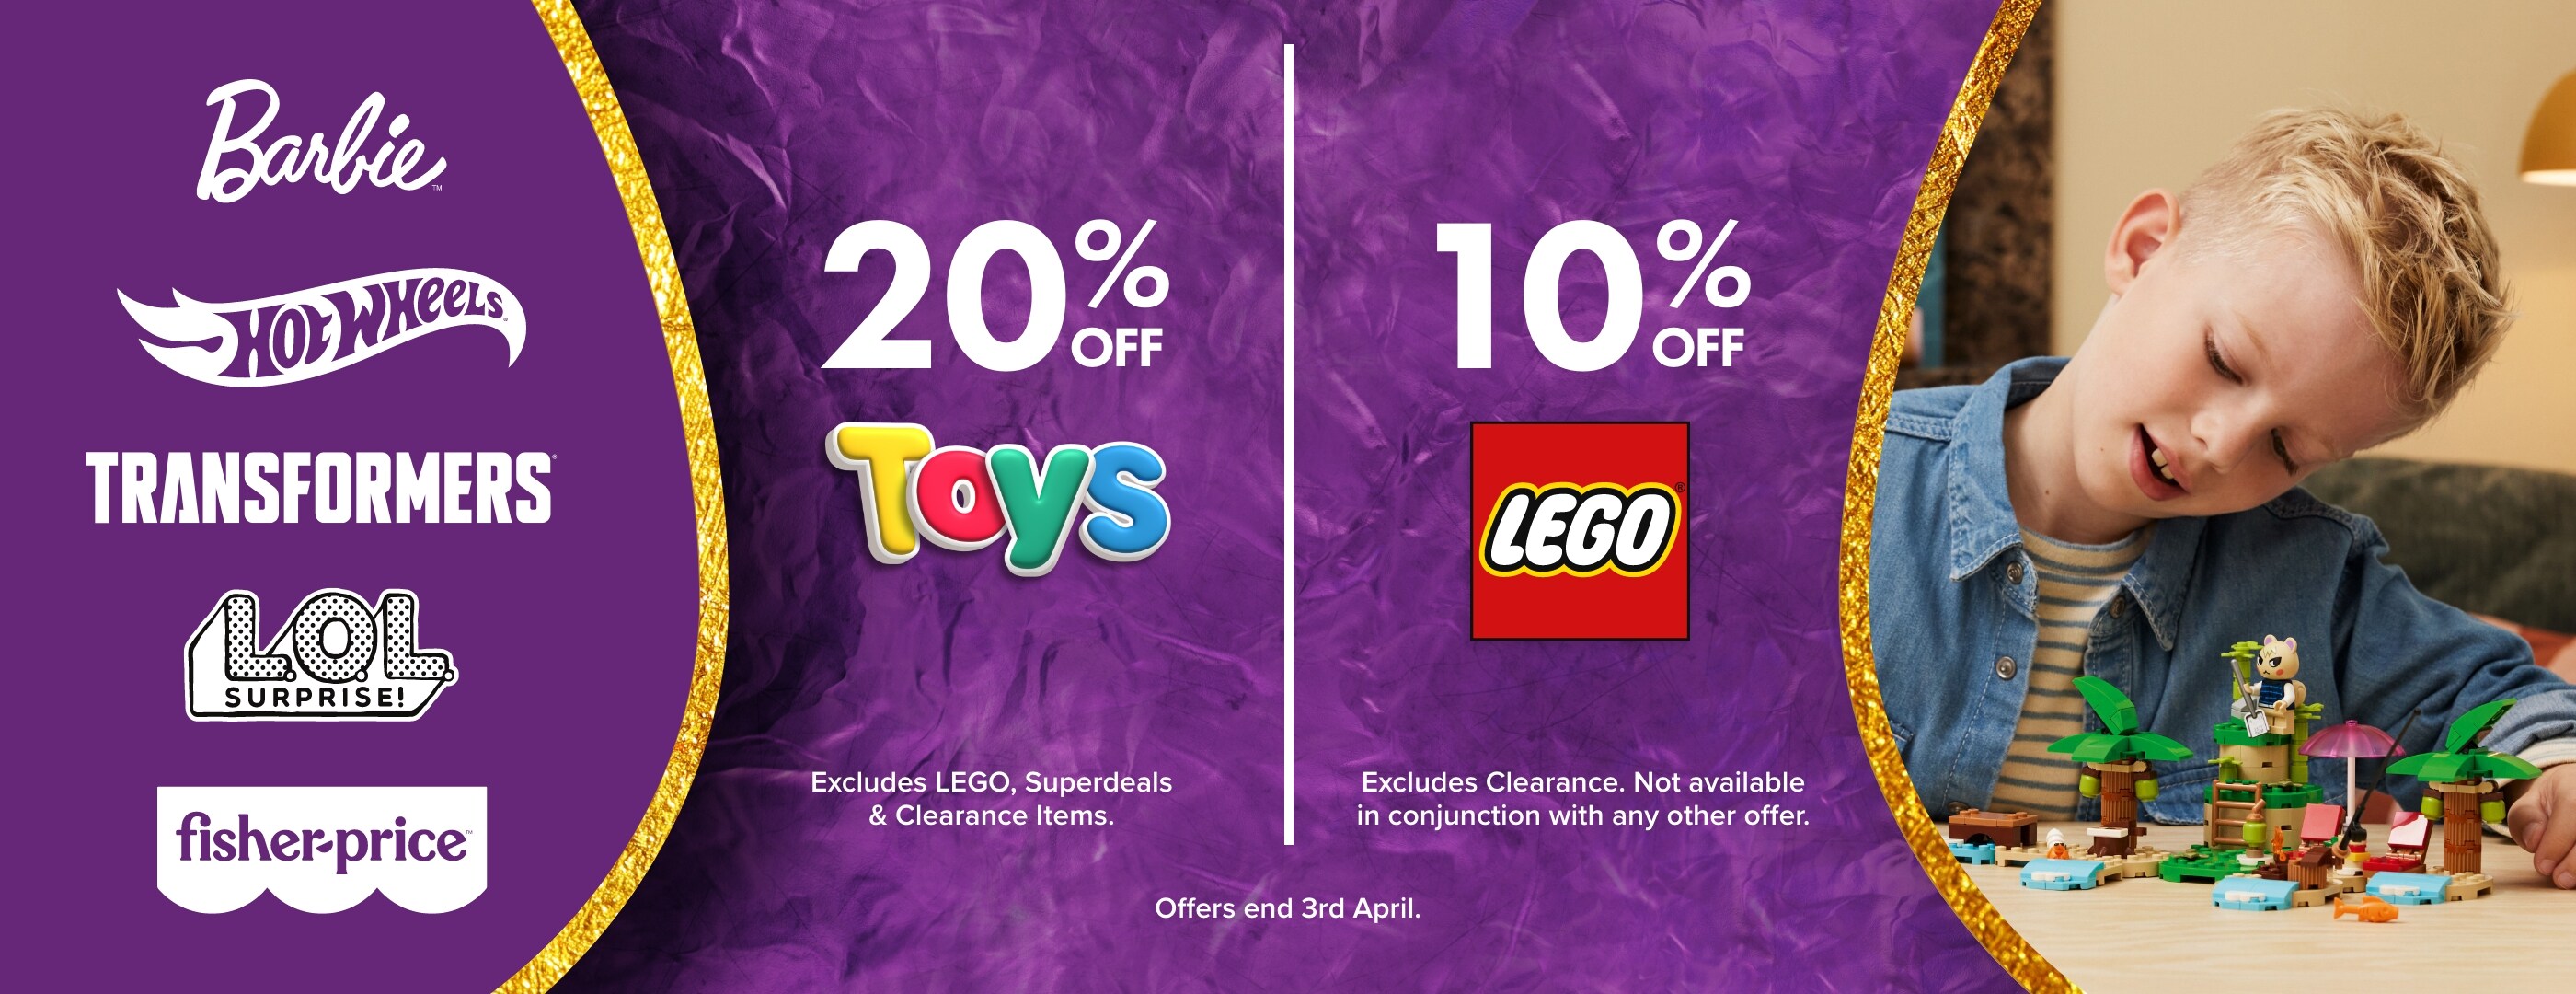 20% OFF Toys | 10% OFF LEGO®